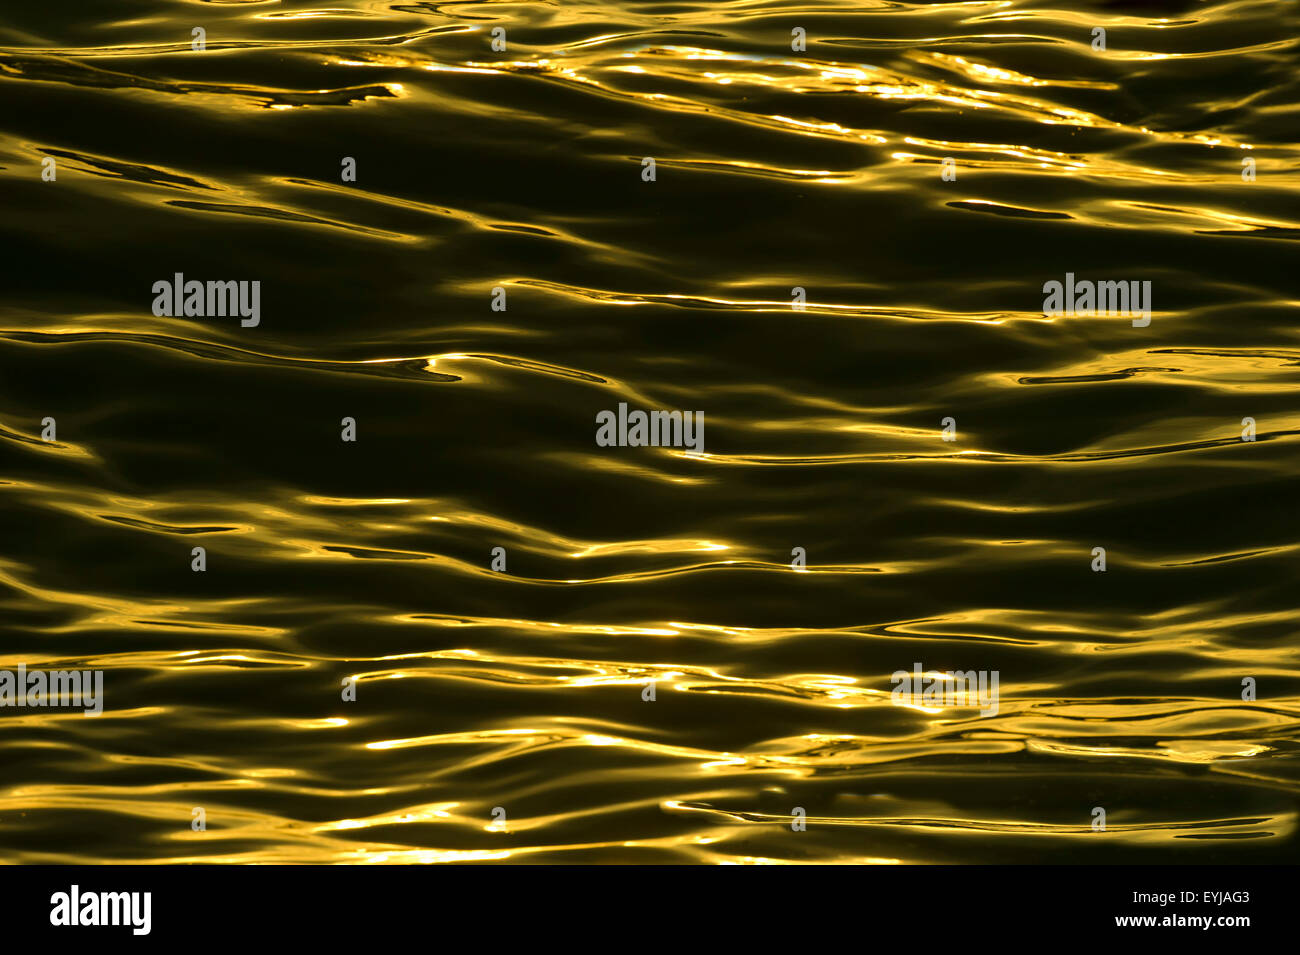 Ripples are beautiful golden surreal wave patterns on the water to form a mesmerizing nature background. Stock Photo